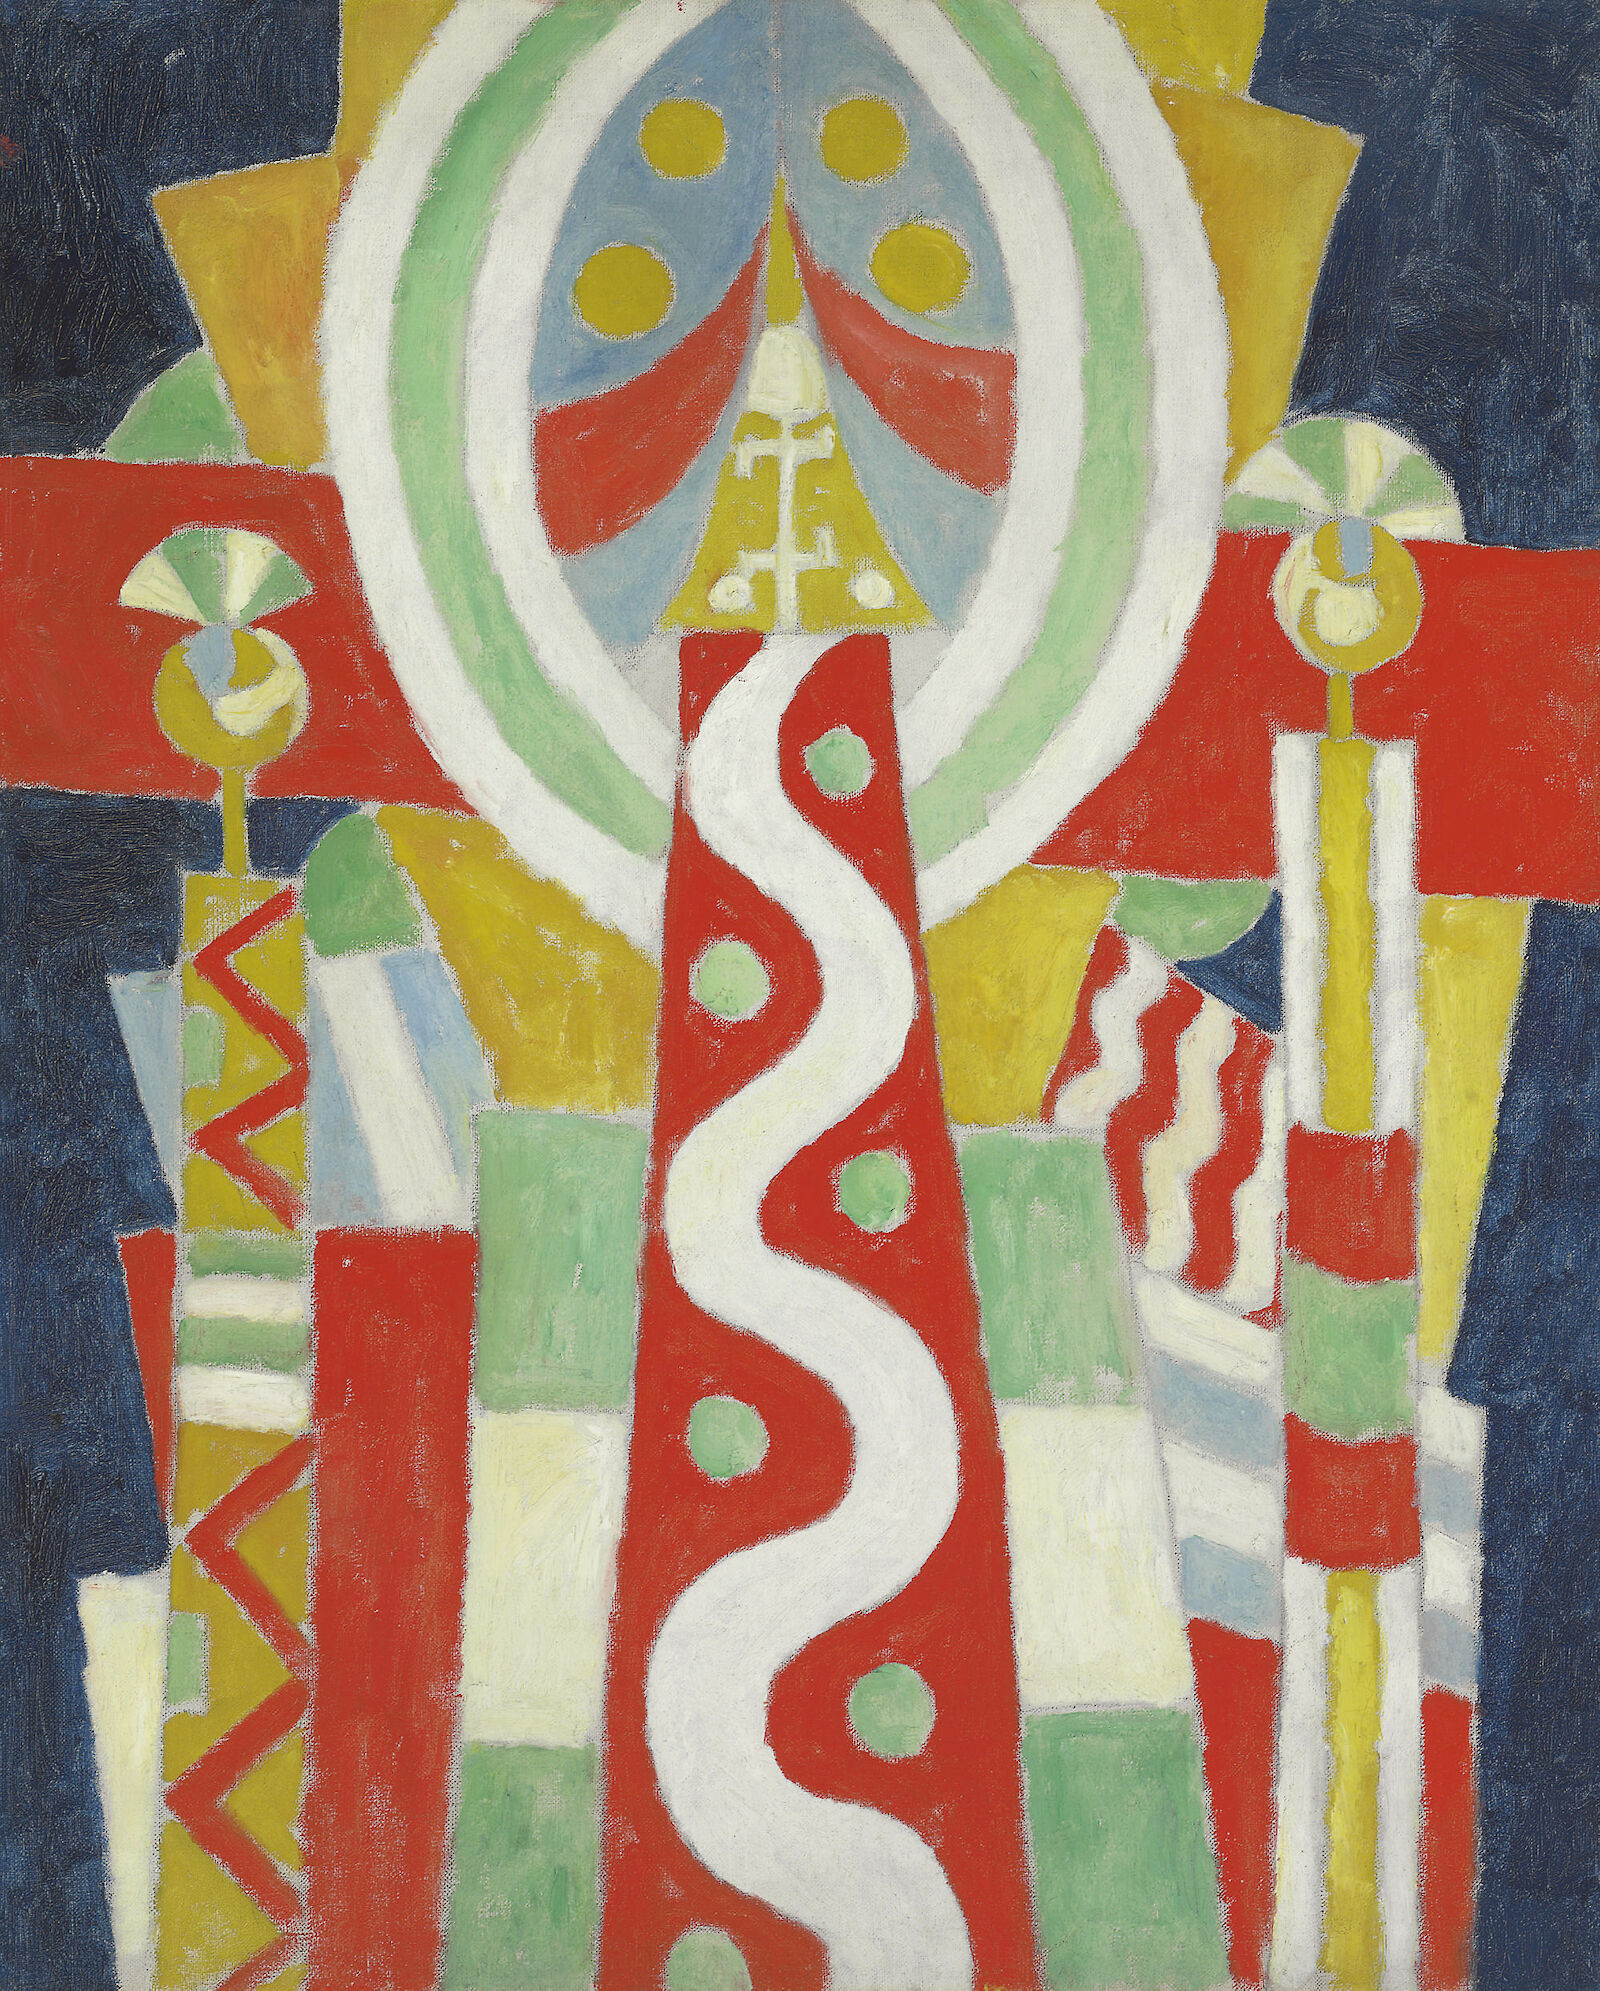 Phare by Marsden Hartley - 1915 - 101.6 x 81.3 cm collection privée